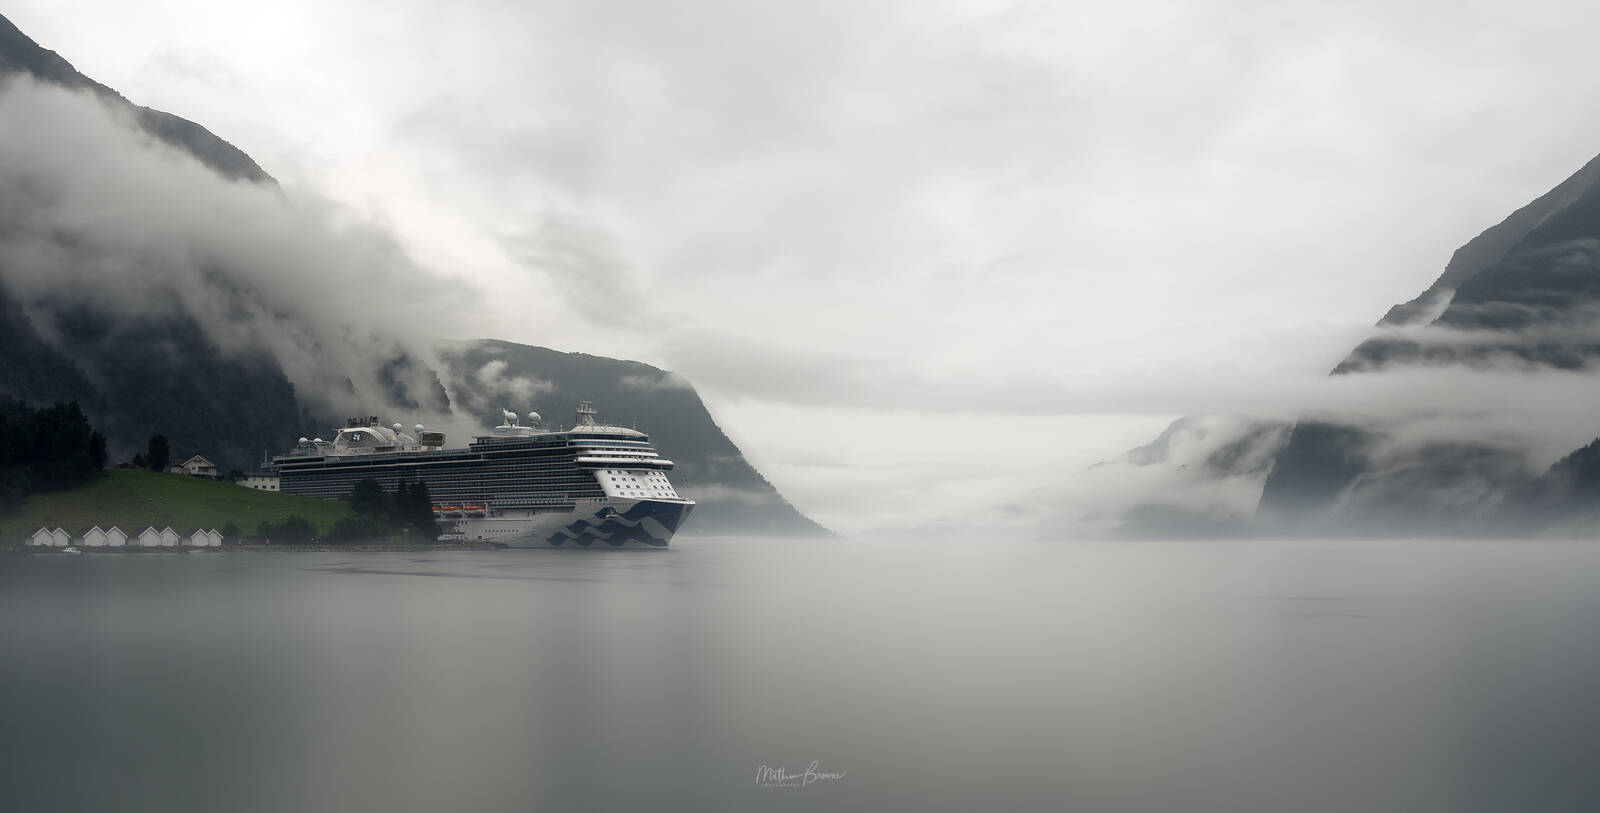 Image of Skjolden Sognefjorden Viewpoint by Mathew Browne